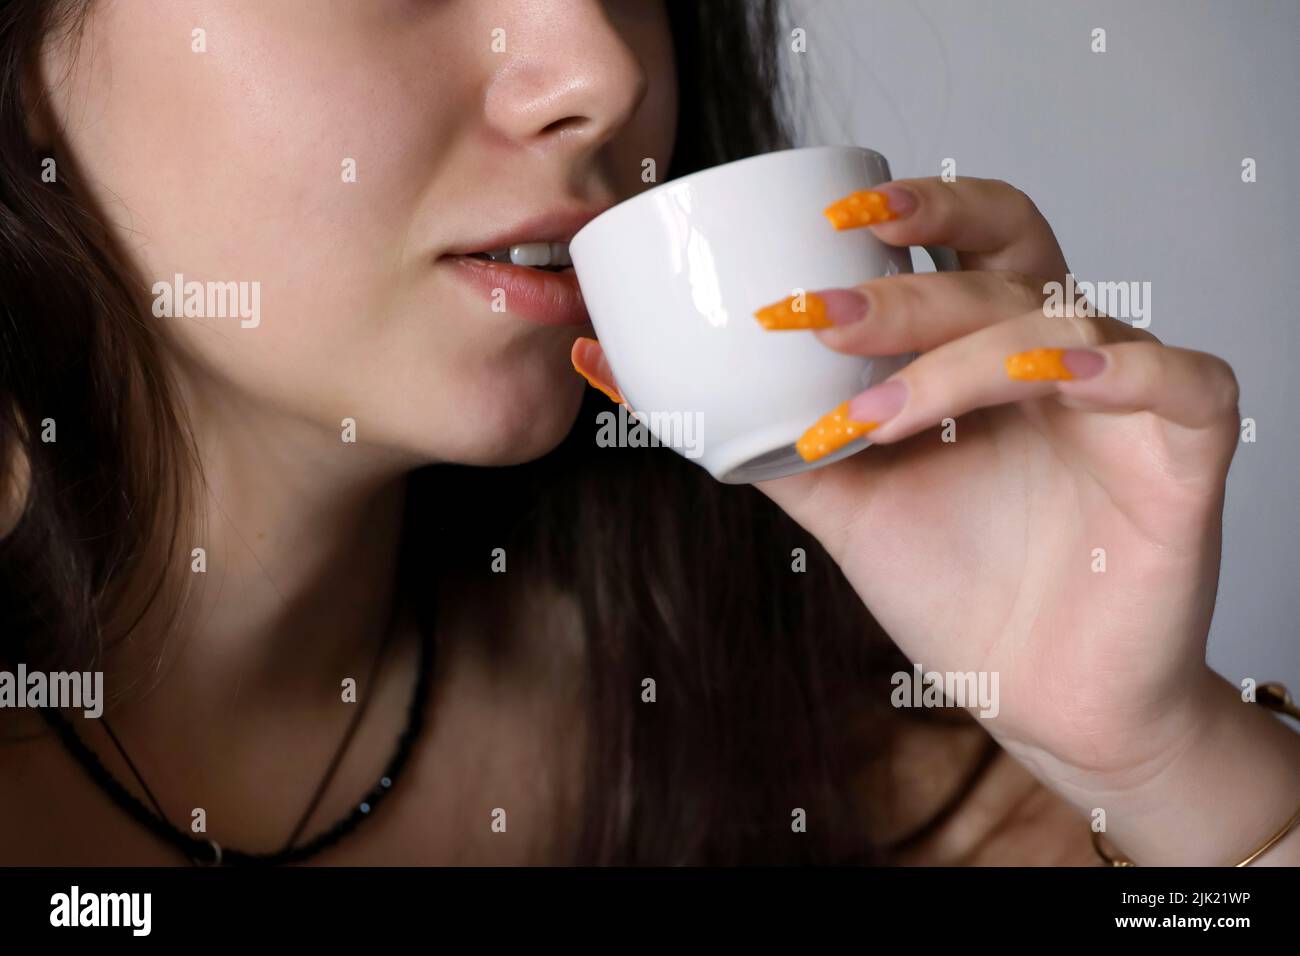 Sensual girl drinking tea or coffee, female lips and white cup in hand with orange acrylic nails close up. Concept of enjoying hot drink Stock Photo